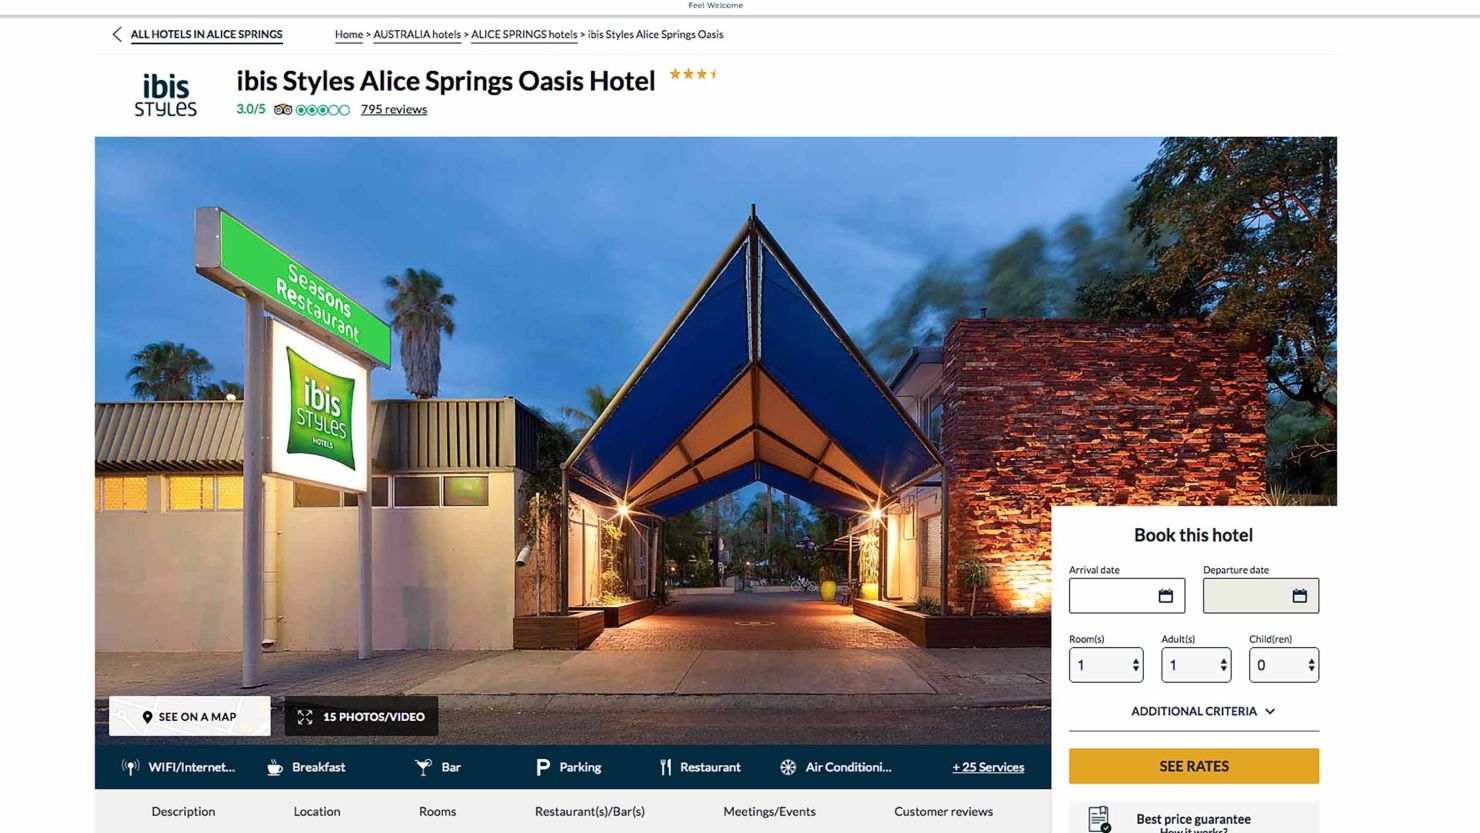 A report by Australian broadcaster ABC found that the Ibis Styles Alice Springs Oasis Hotel had a policy of segregating Aboriginal guests.